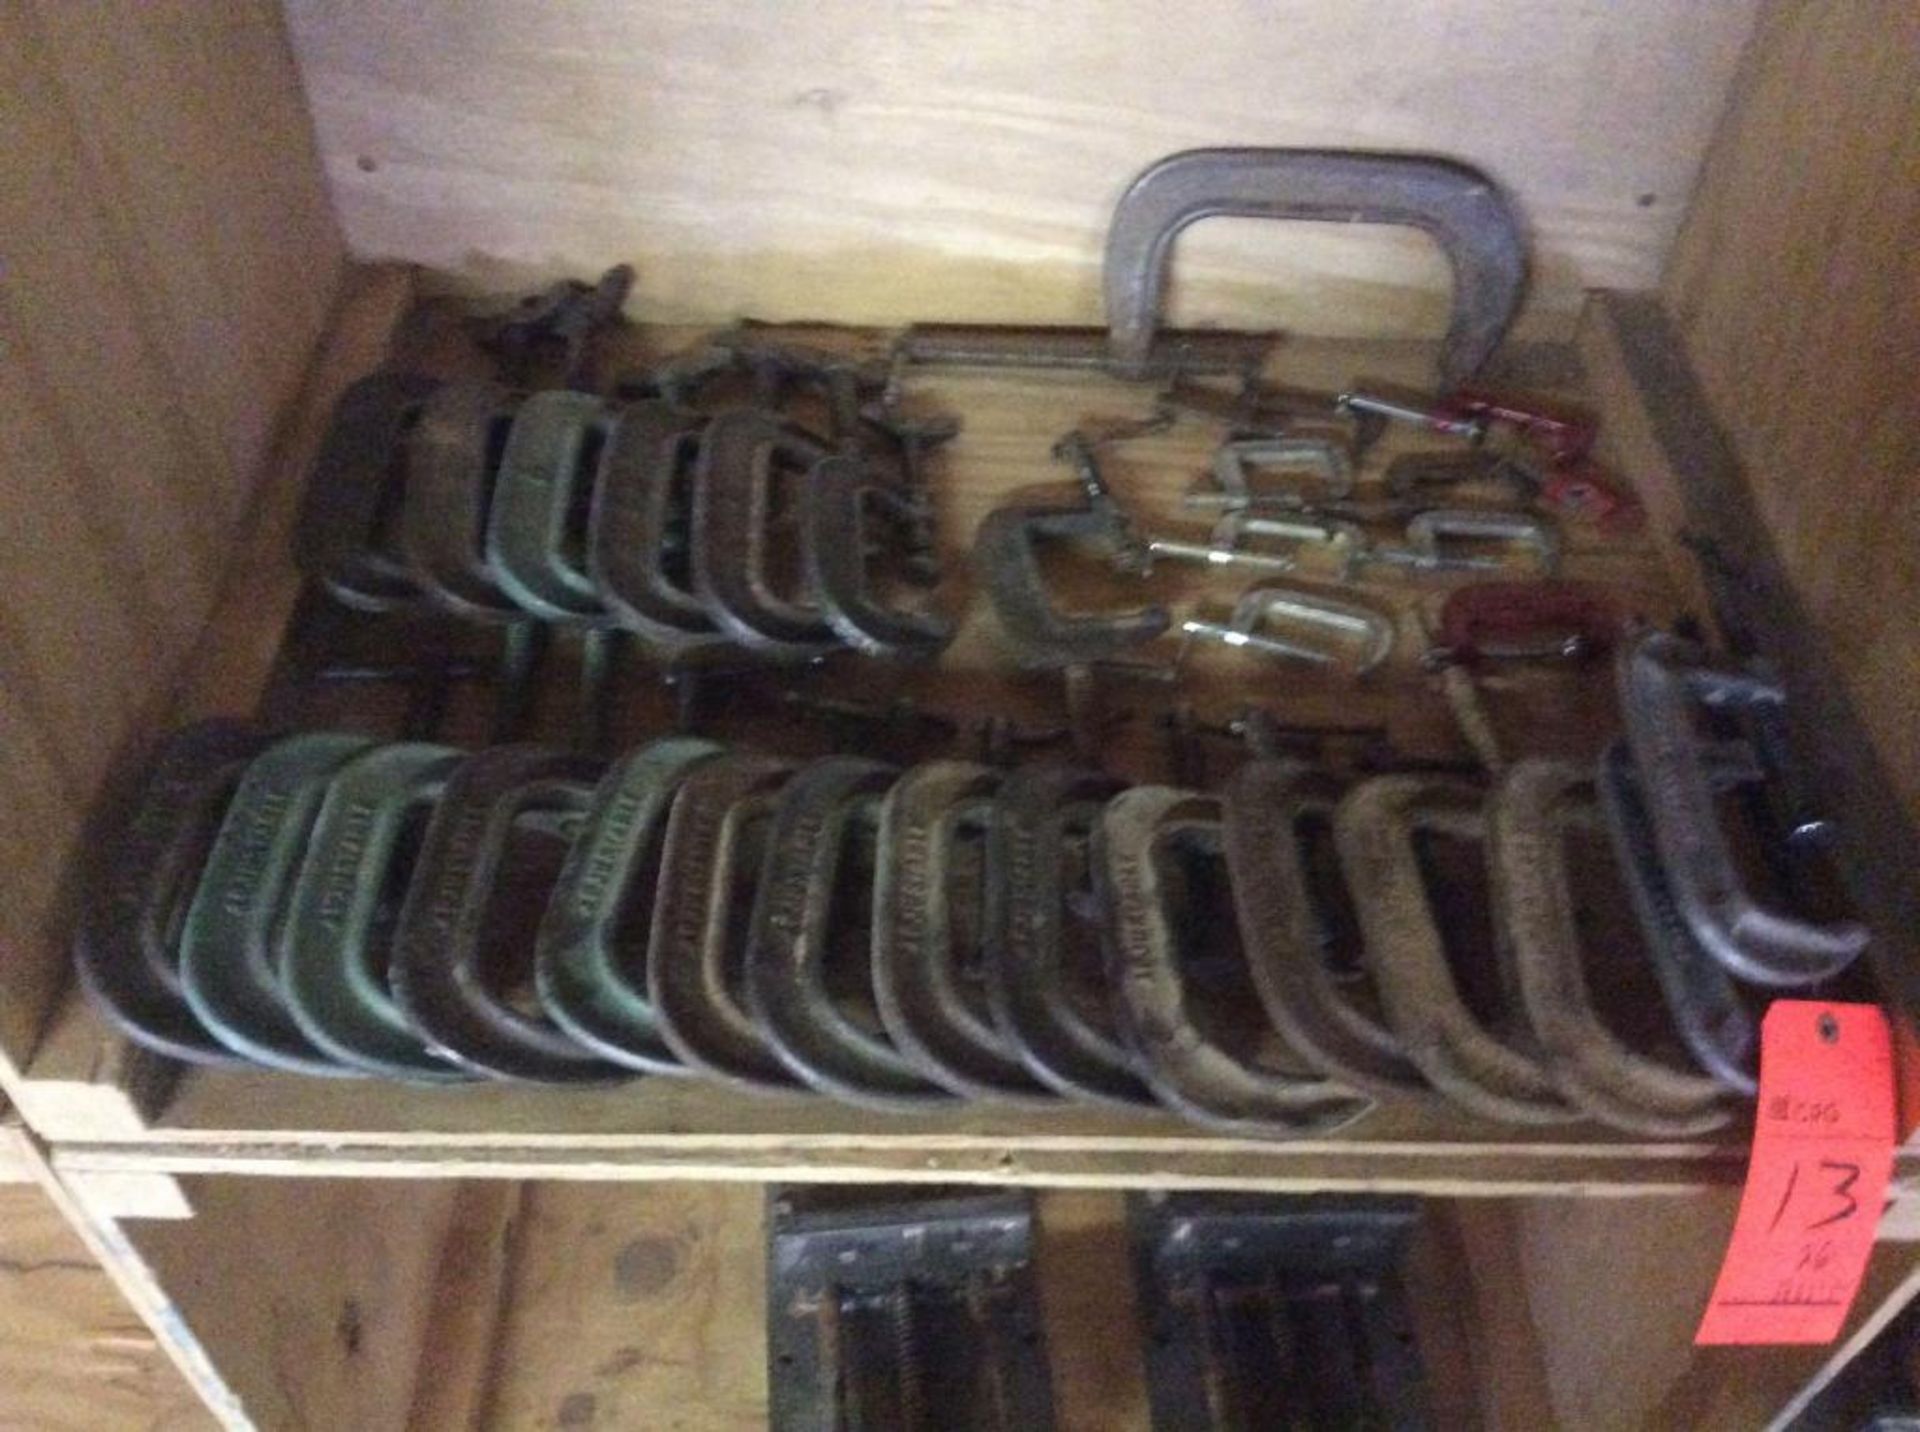 Lot of (32) assorted C clamps